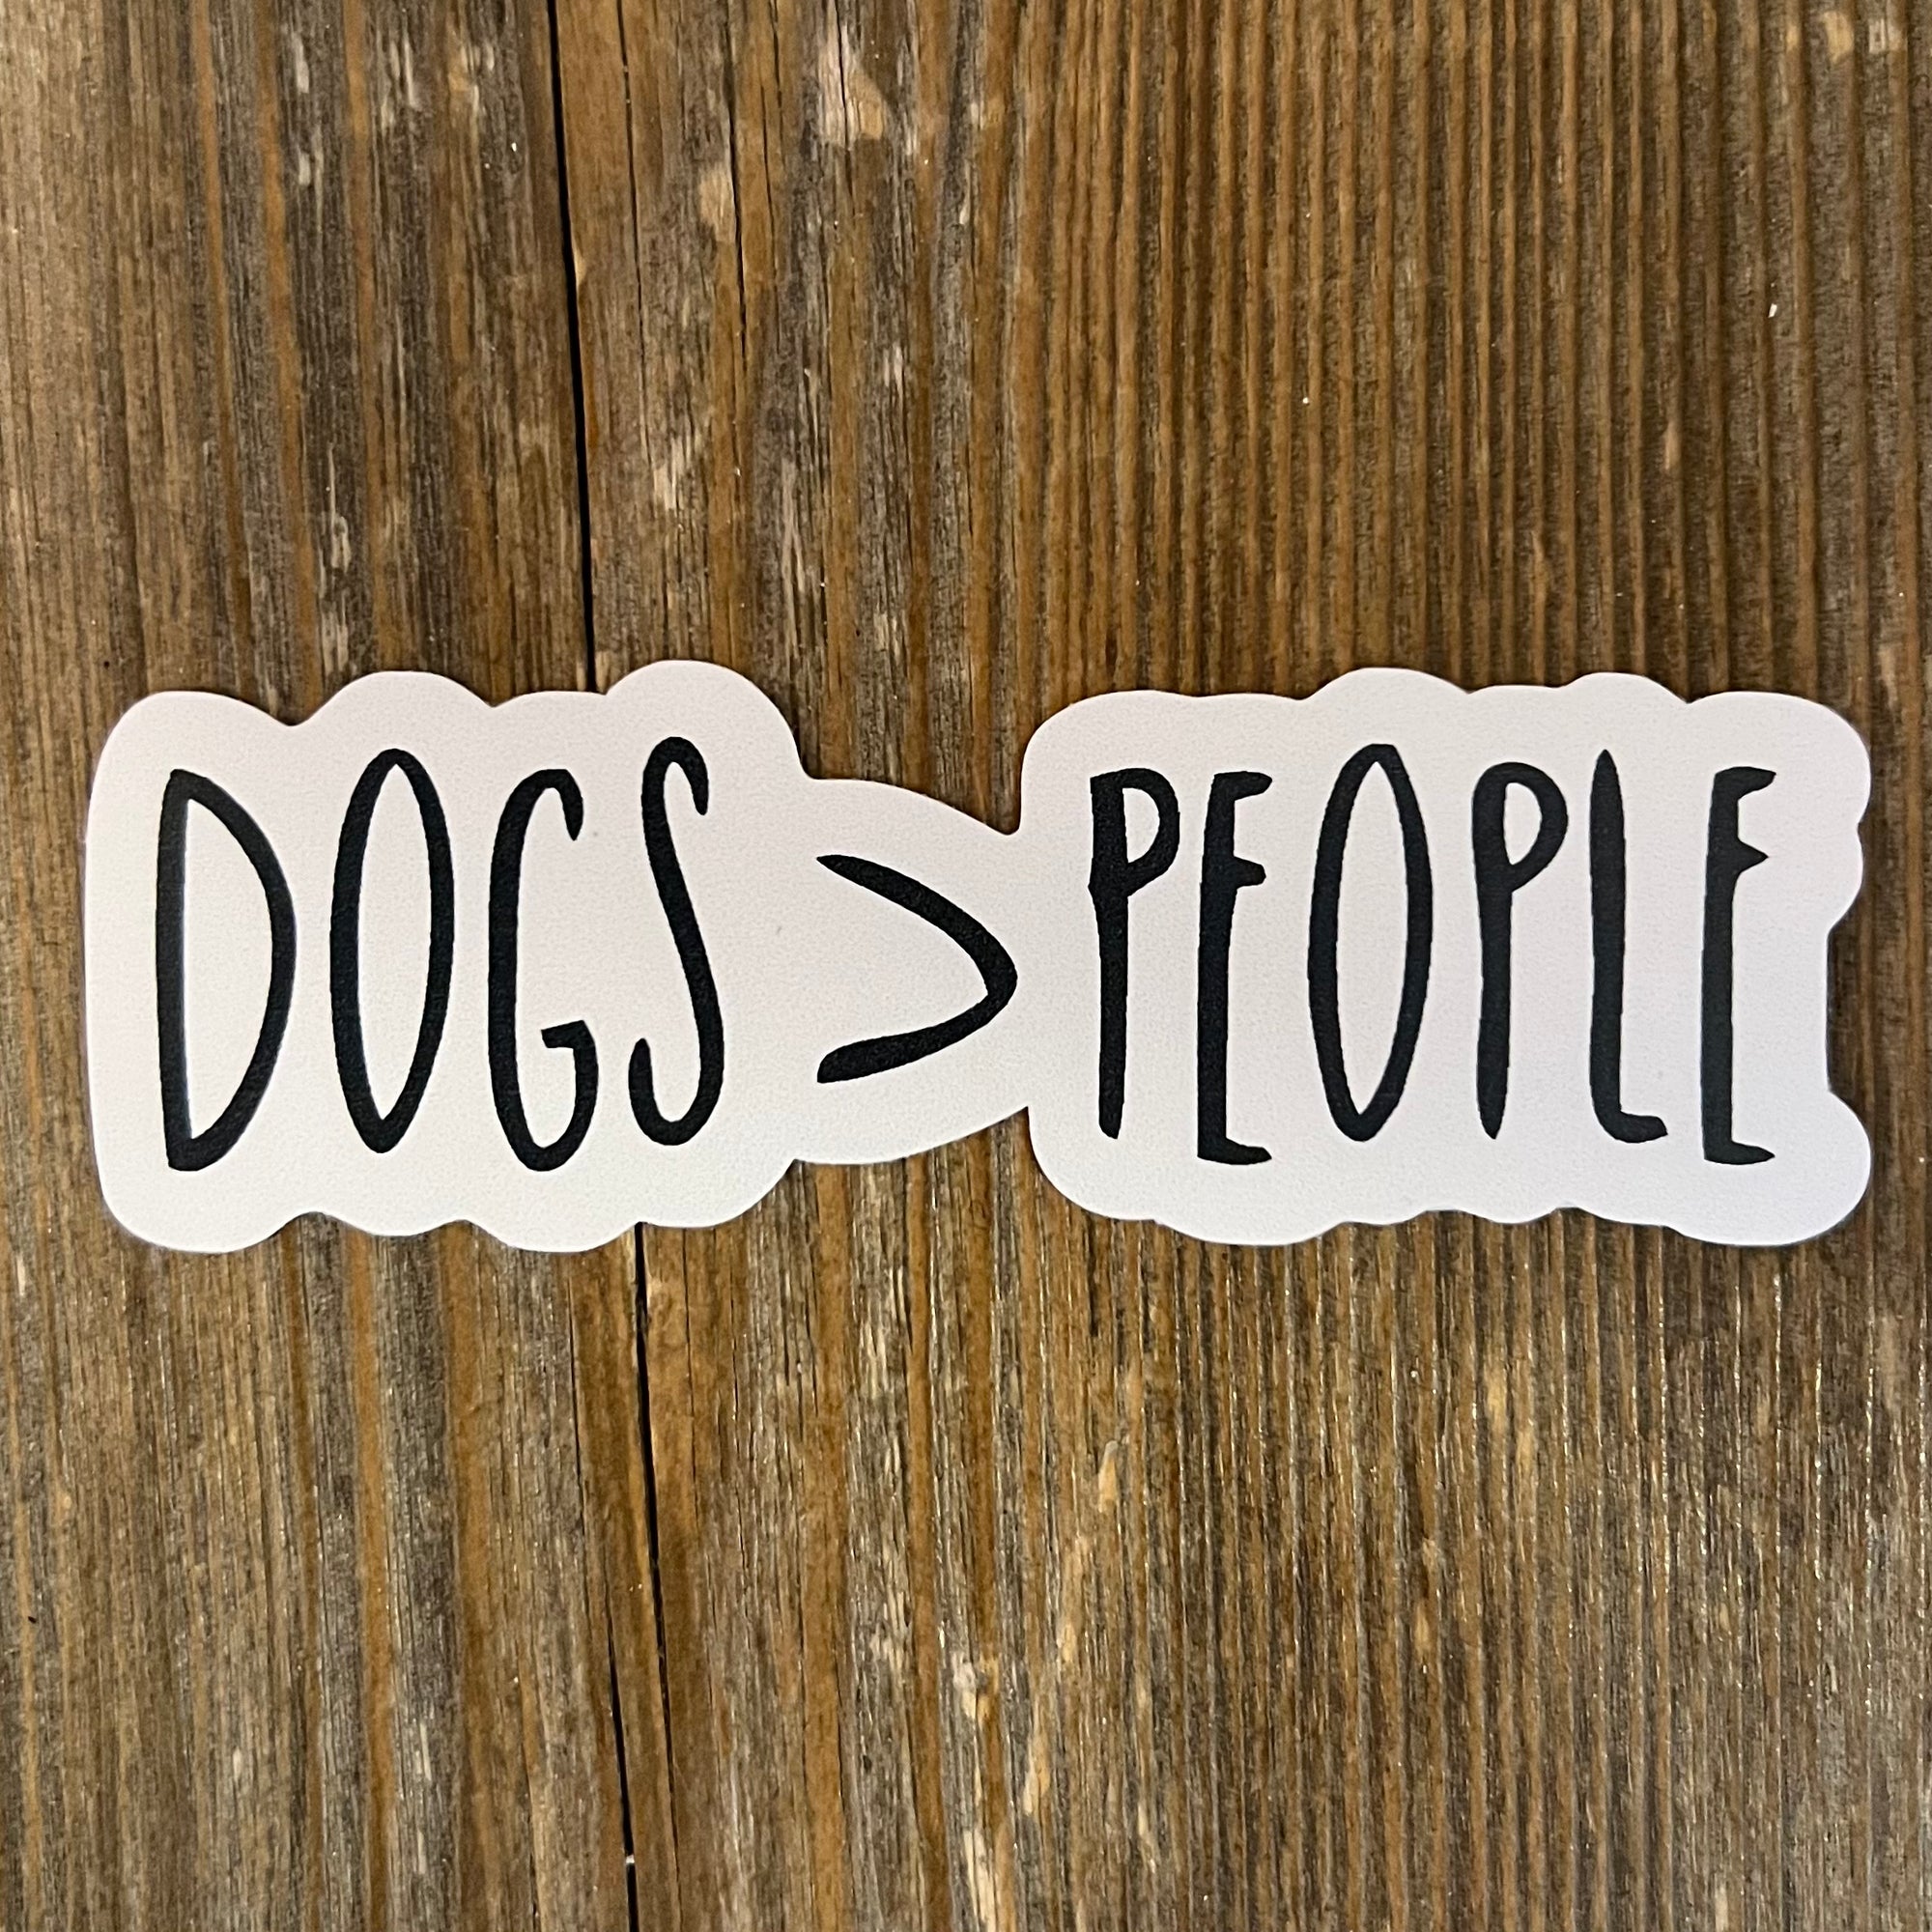 Dogs Over People Sticker 3 Inch